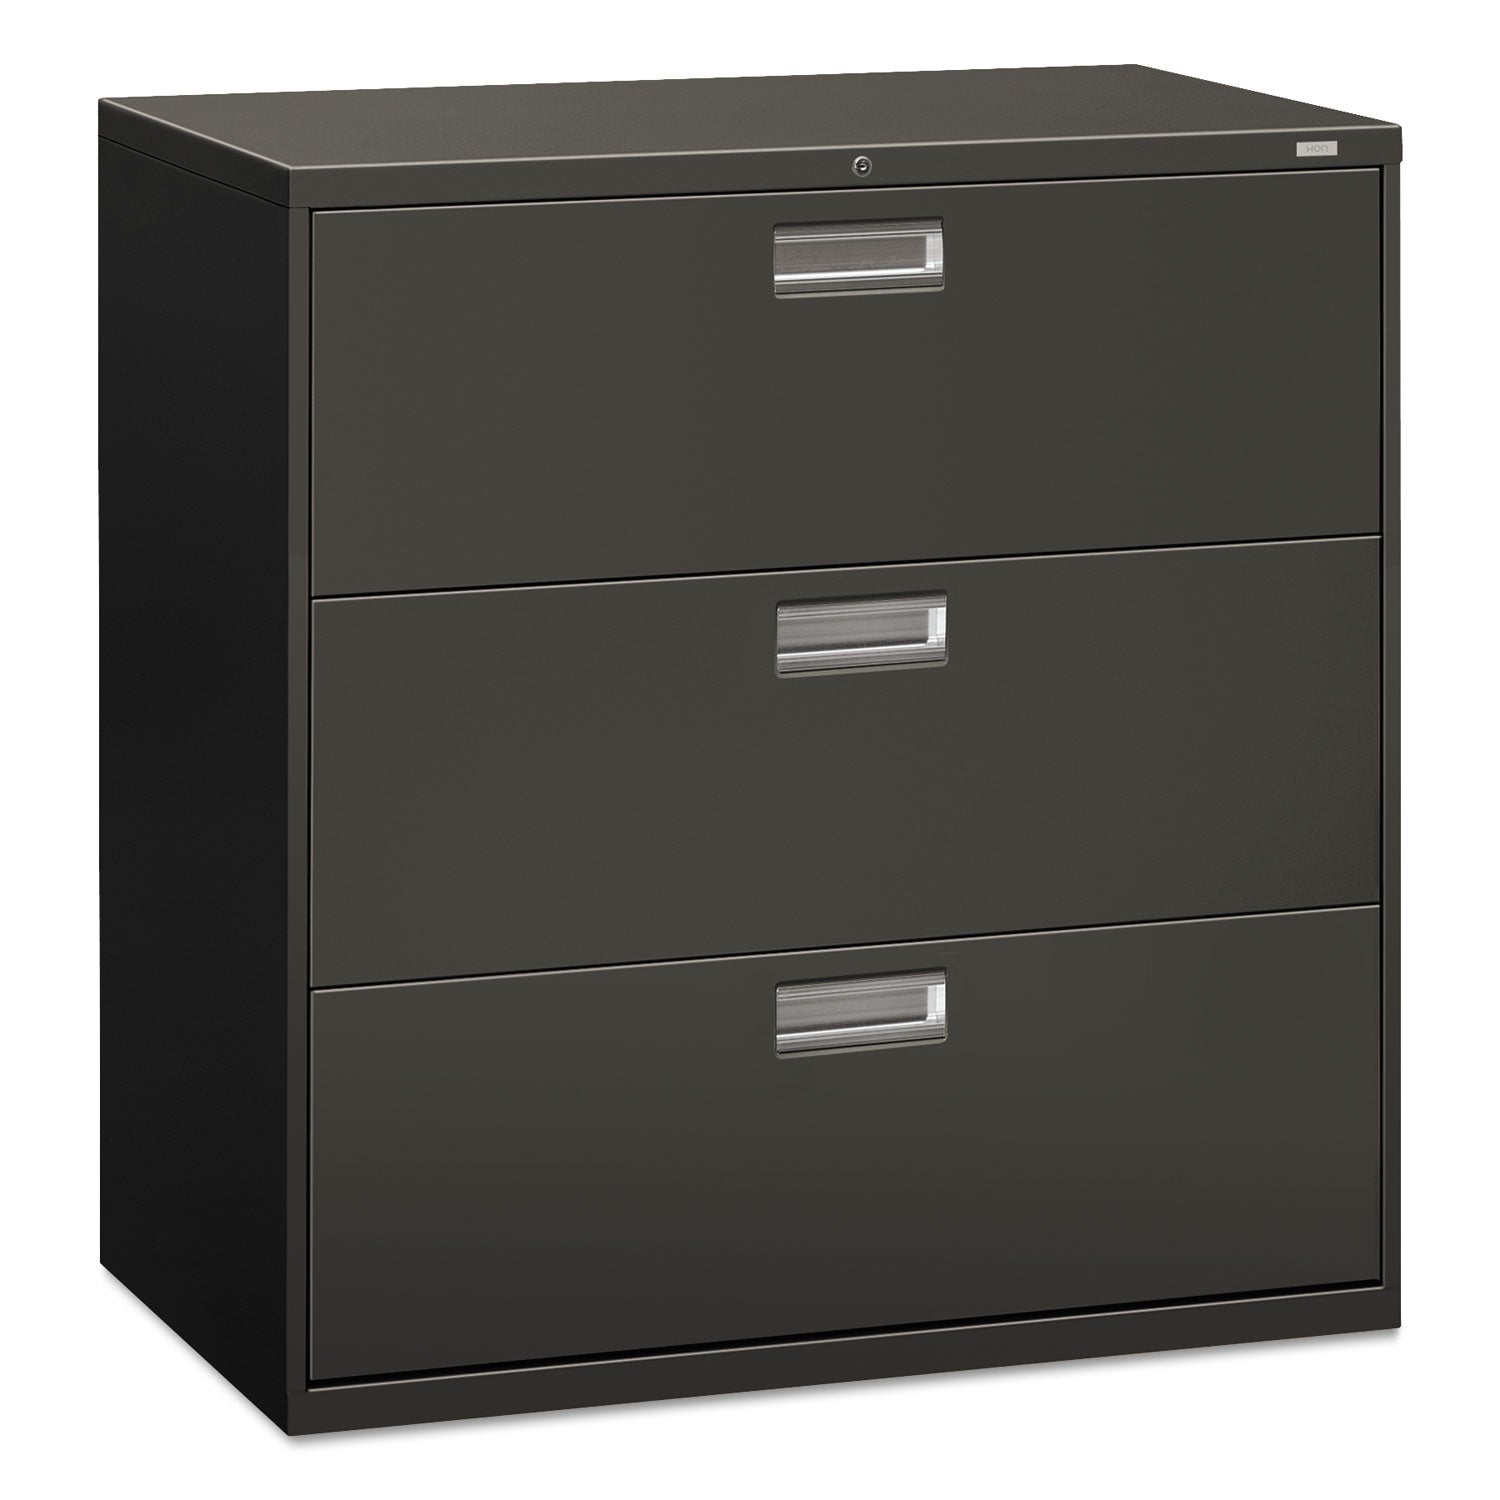 Brigade 600 Series Lateral File, 3 Legal/Letter-Size File Drawers, Charcoal, 42" x 18" x 39.13 - 